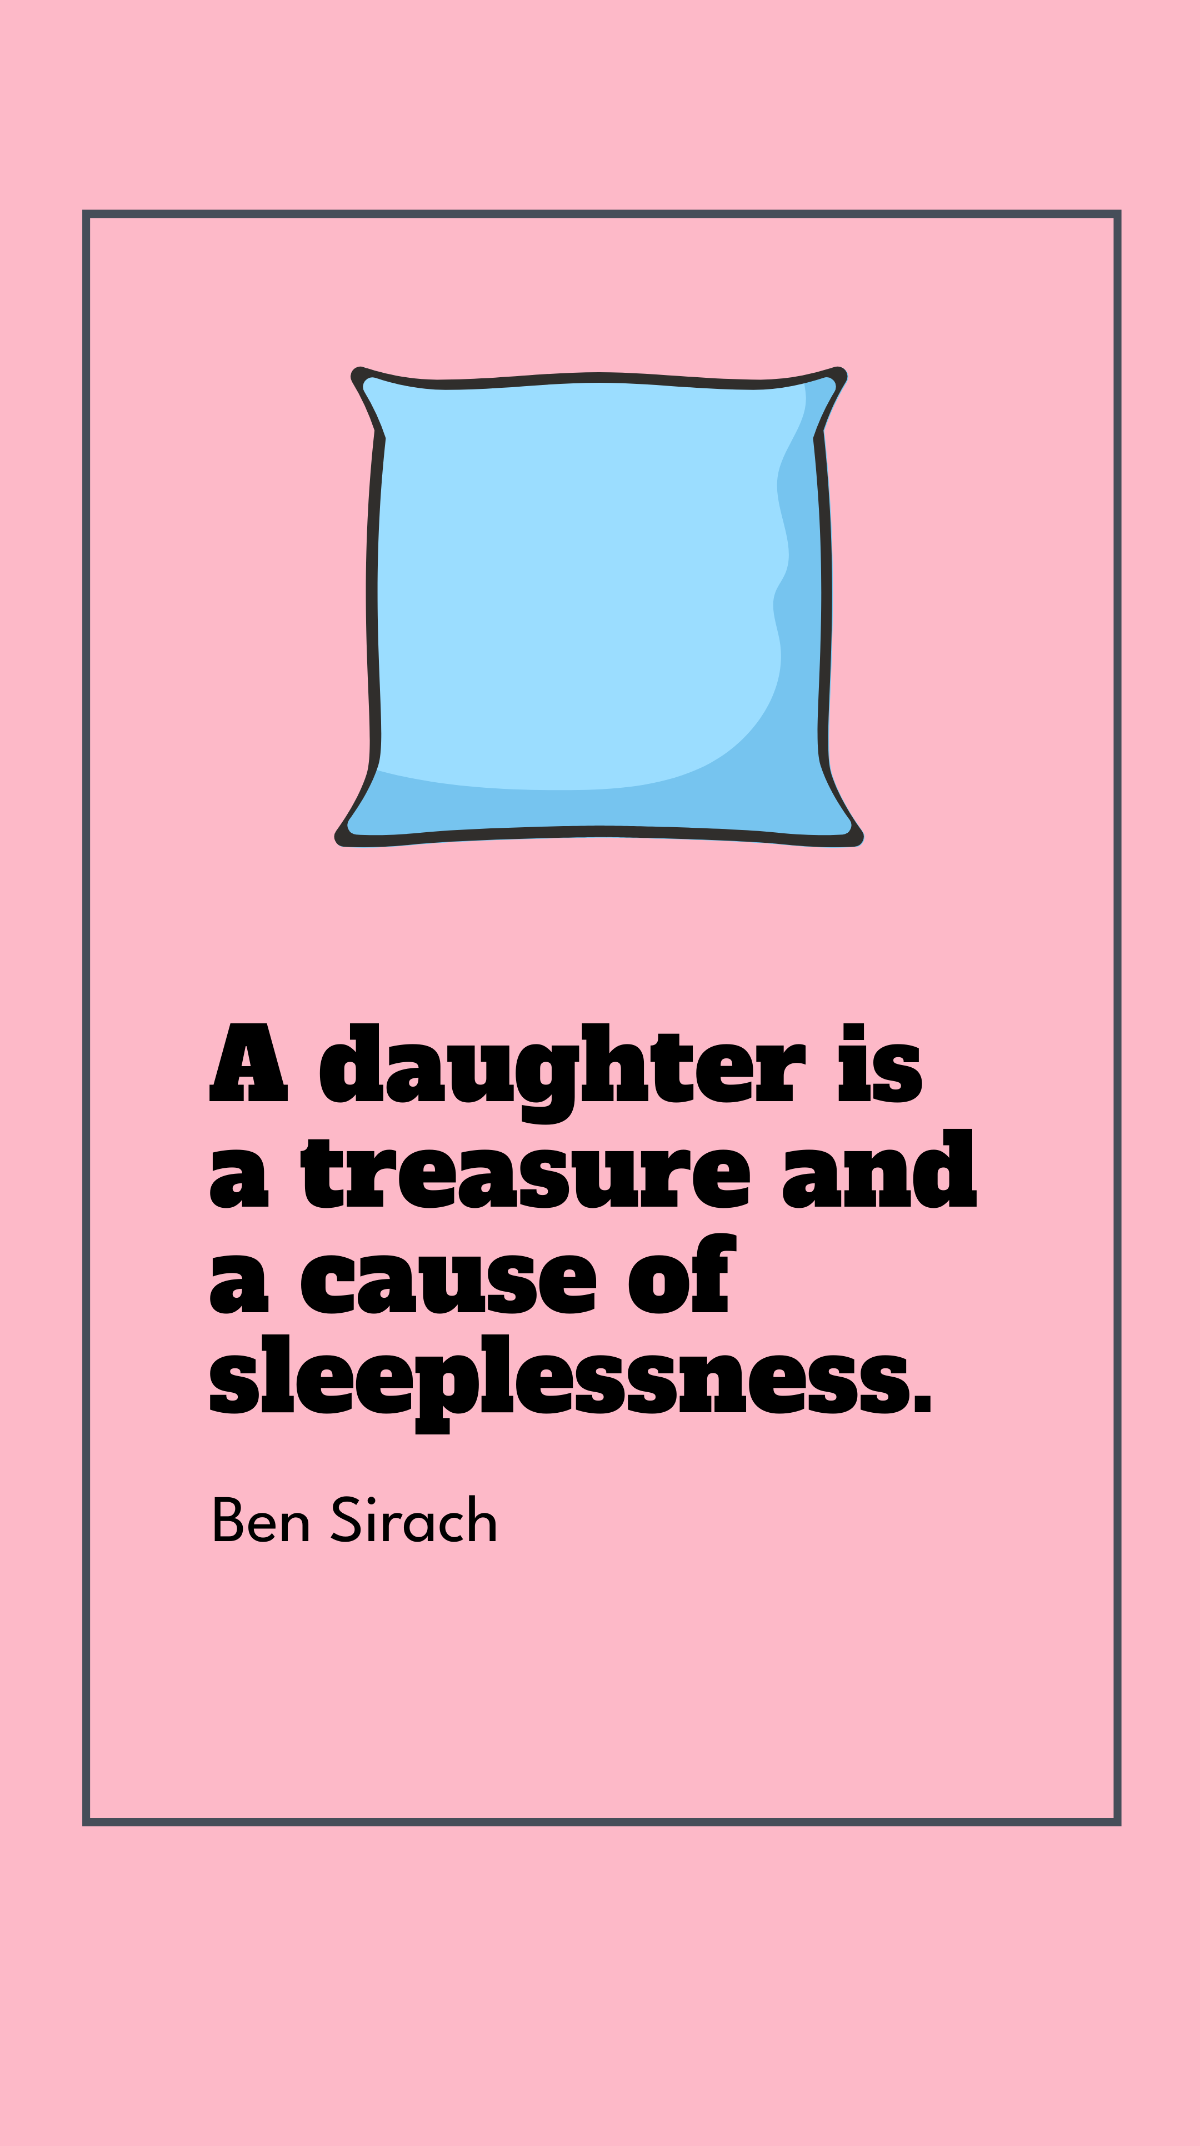 Ben Sirach - A daughter is a treasure and a cause of sleeplessness. Template